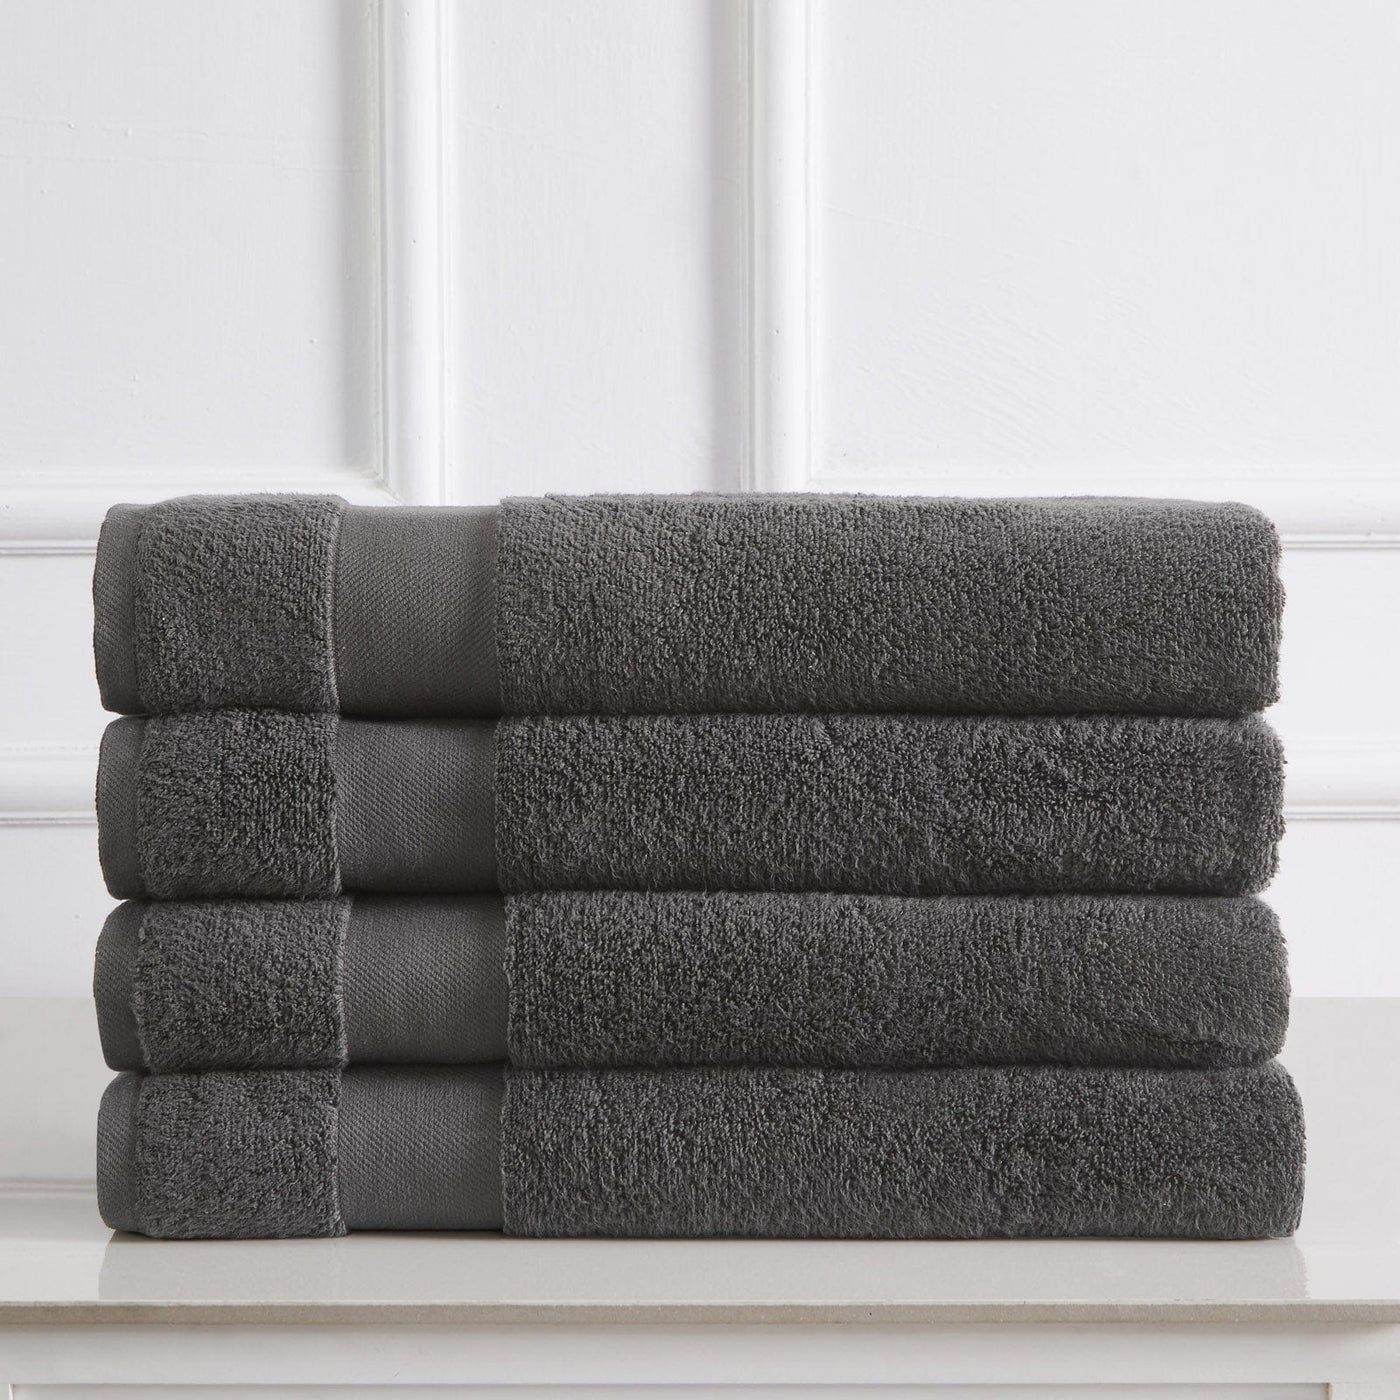 4 Piece of Super-Plush Bath Towel in Charcoal Stack Together#color_medium-weight-classic-towel-charcoal